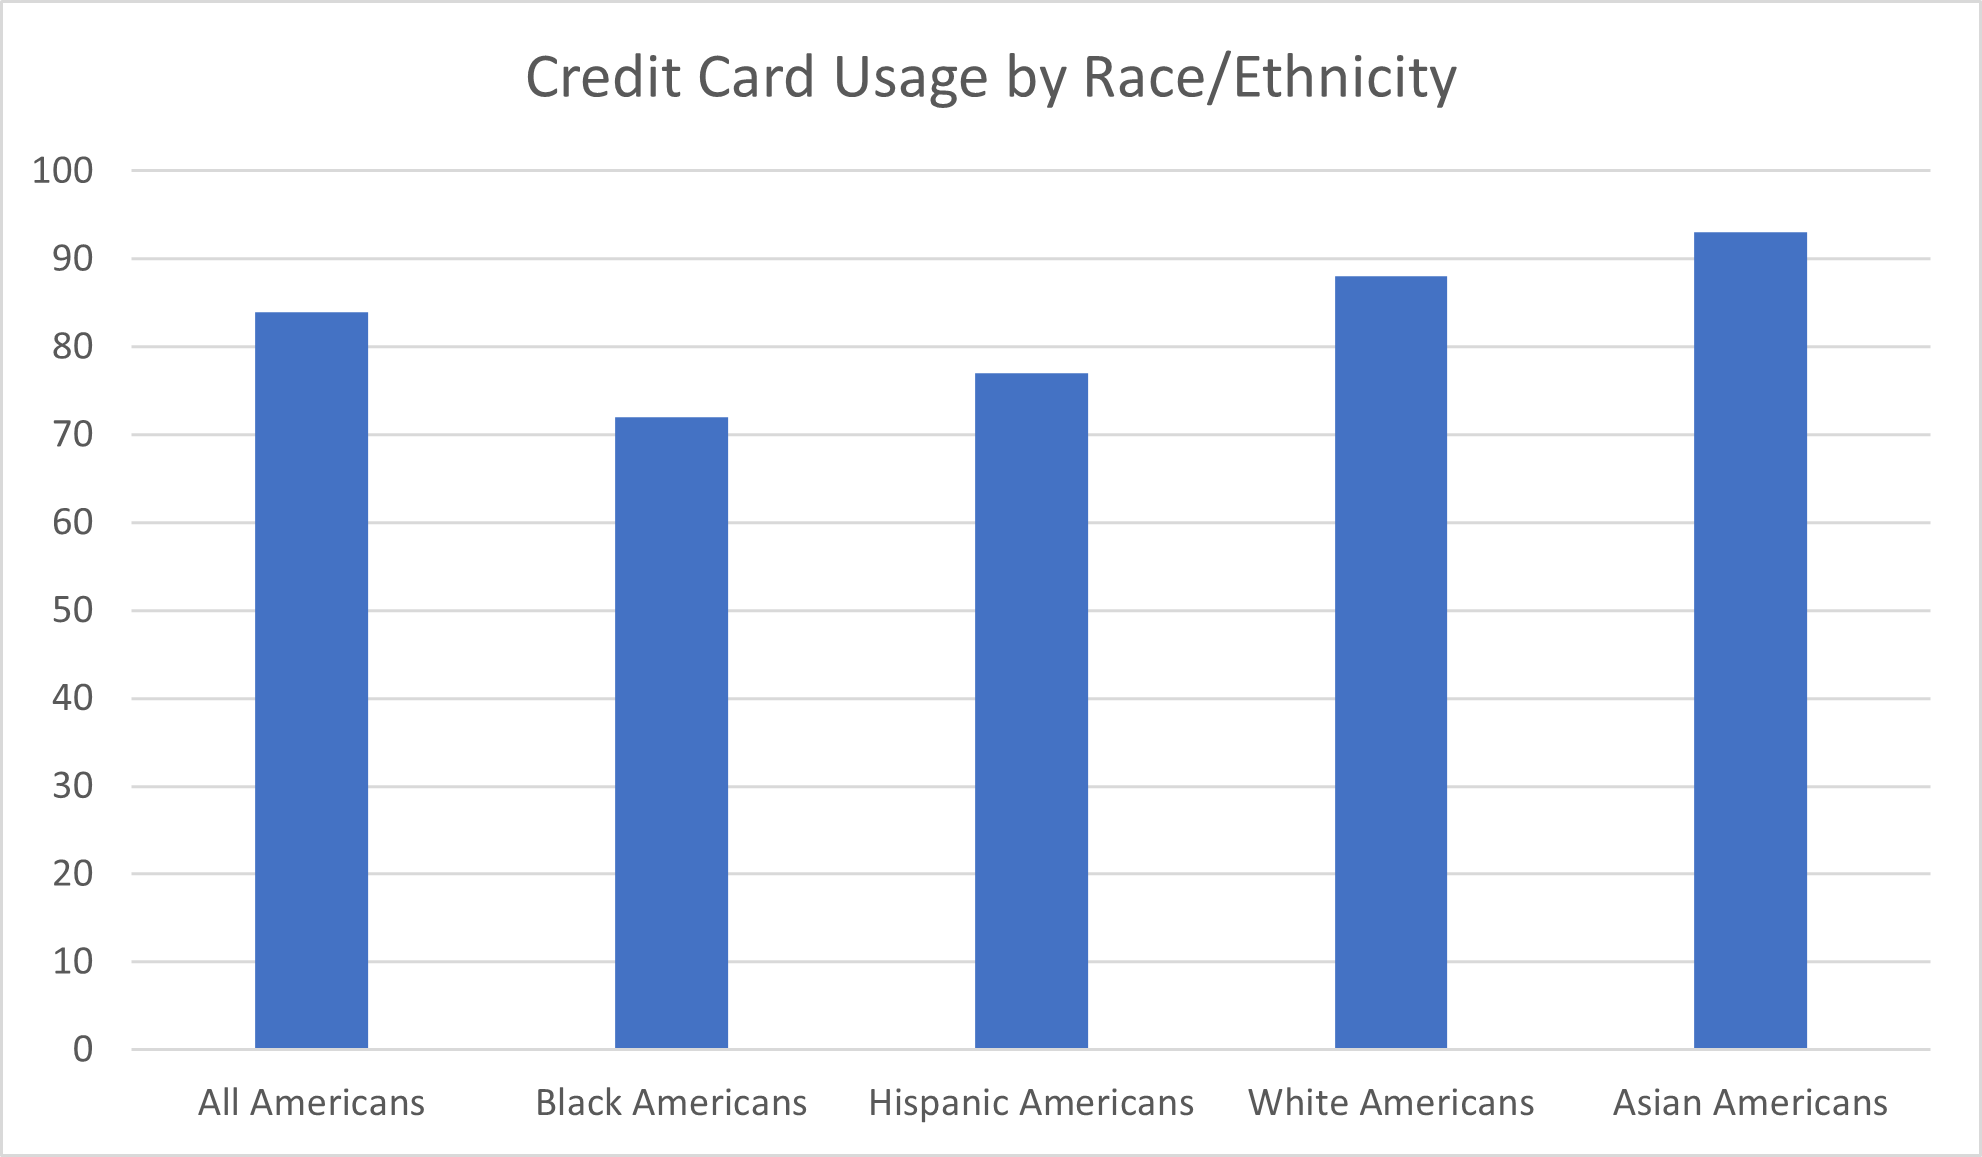 Credit Card Usage by Race/Ethnicity